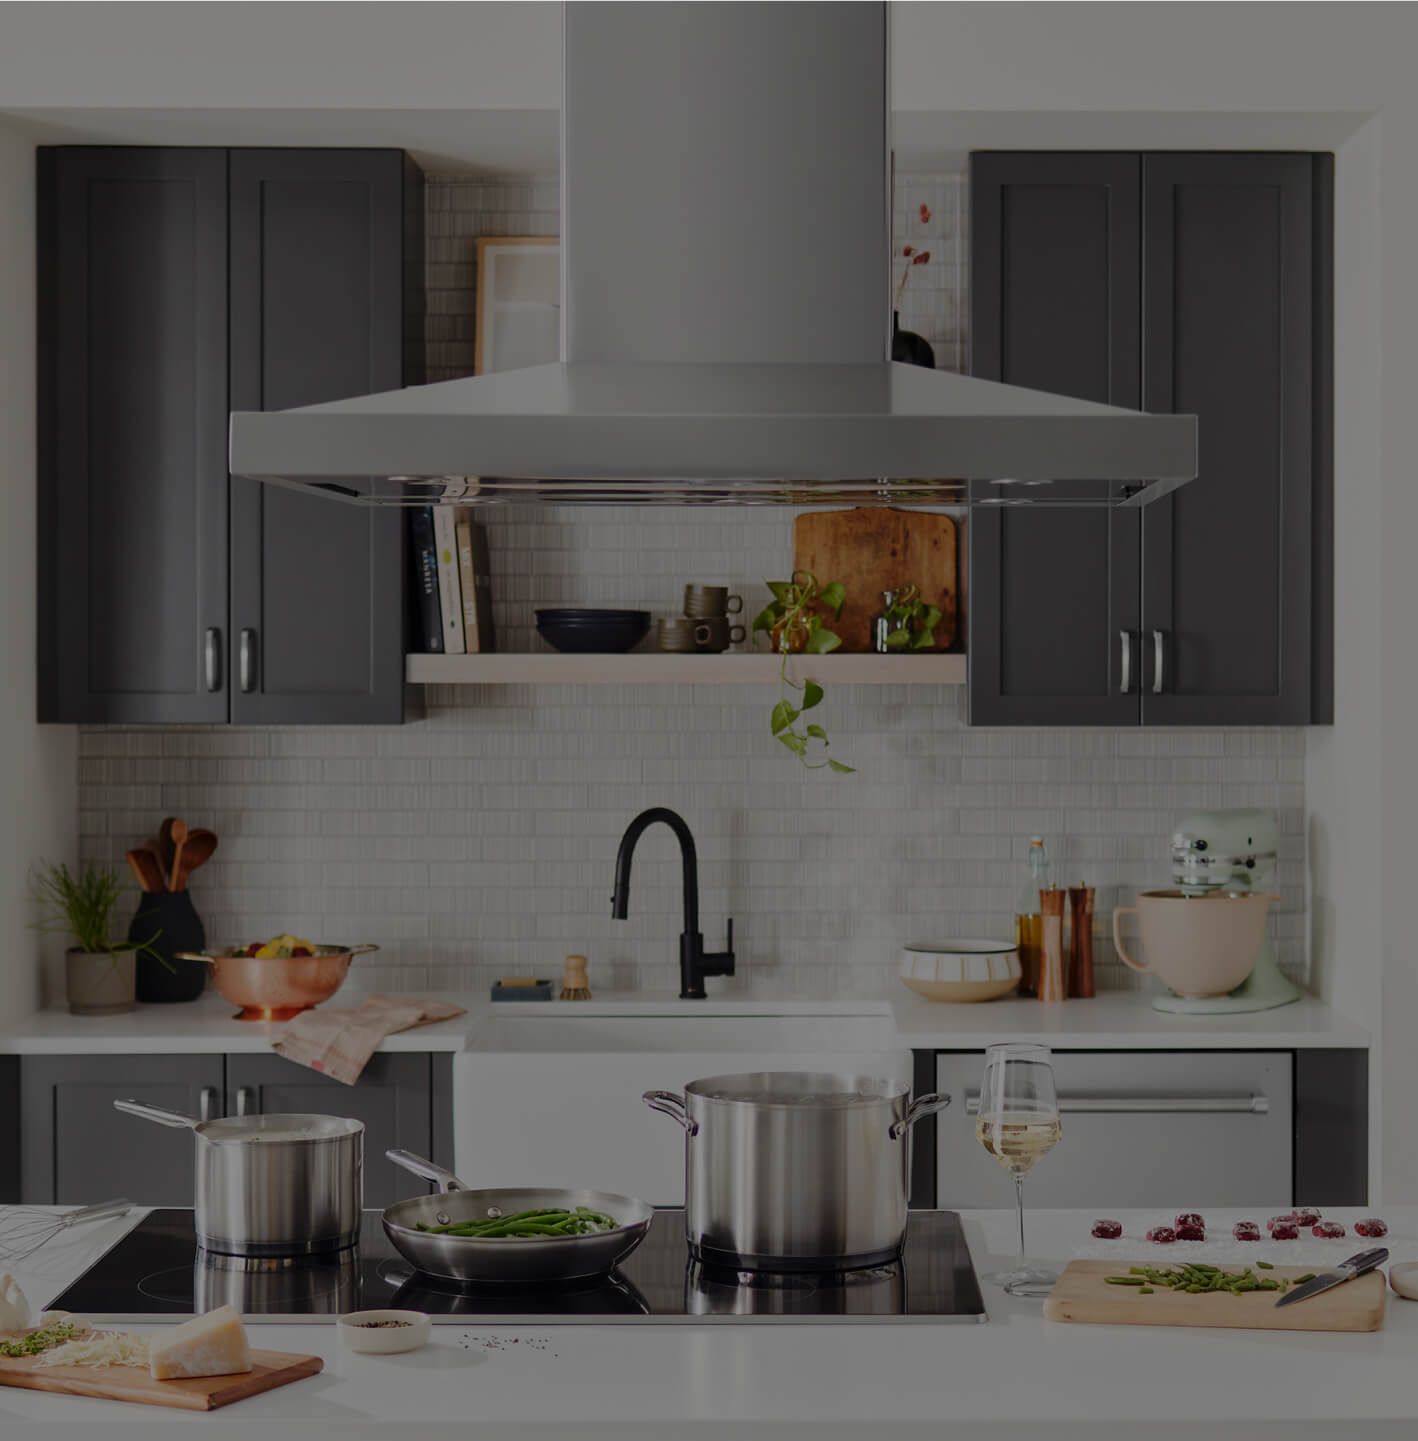 A KitchenAid® island hood above an induction cooktop.